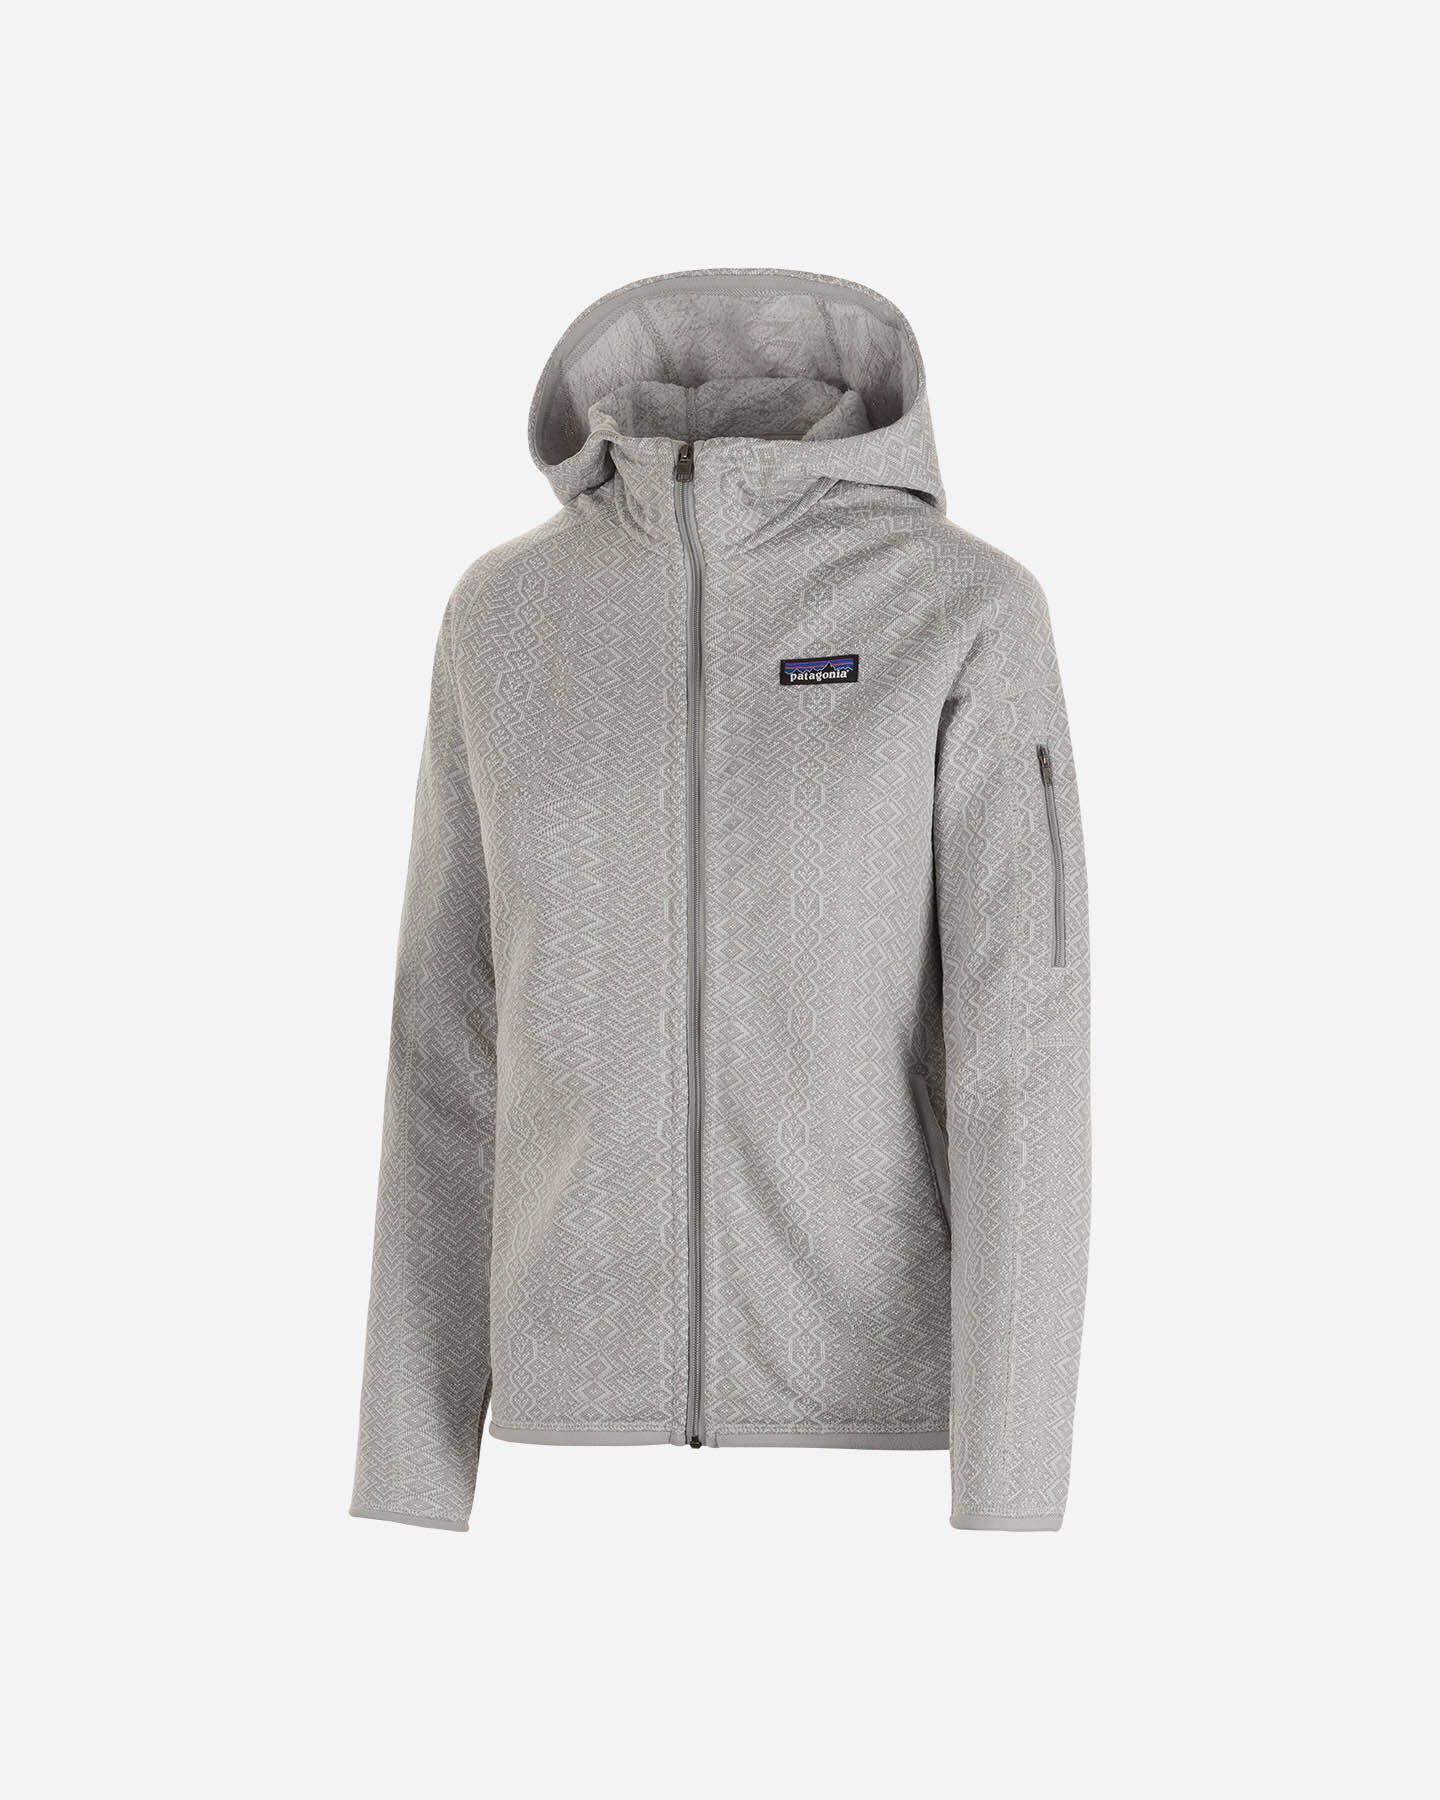  Pile PATAGONIA BETTER WS.GREY HD W S5443476|FJSA|XS scatto 0